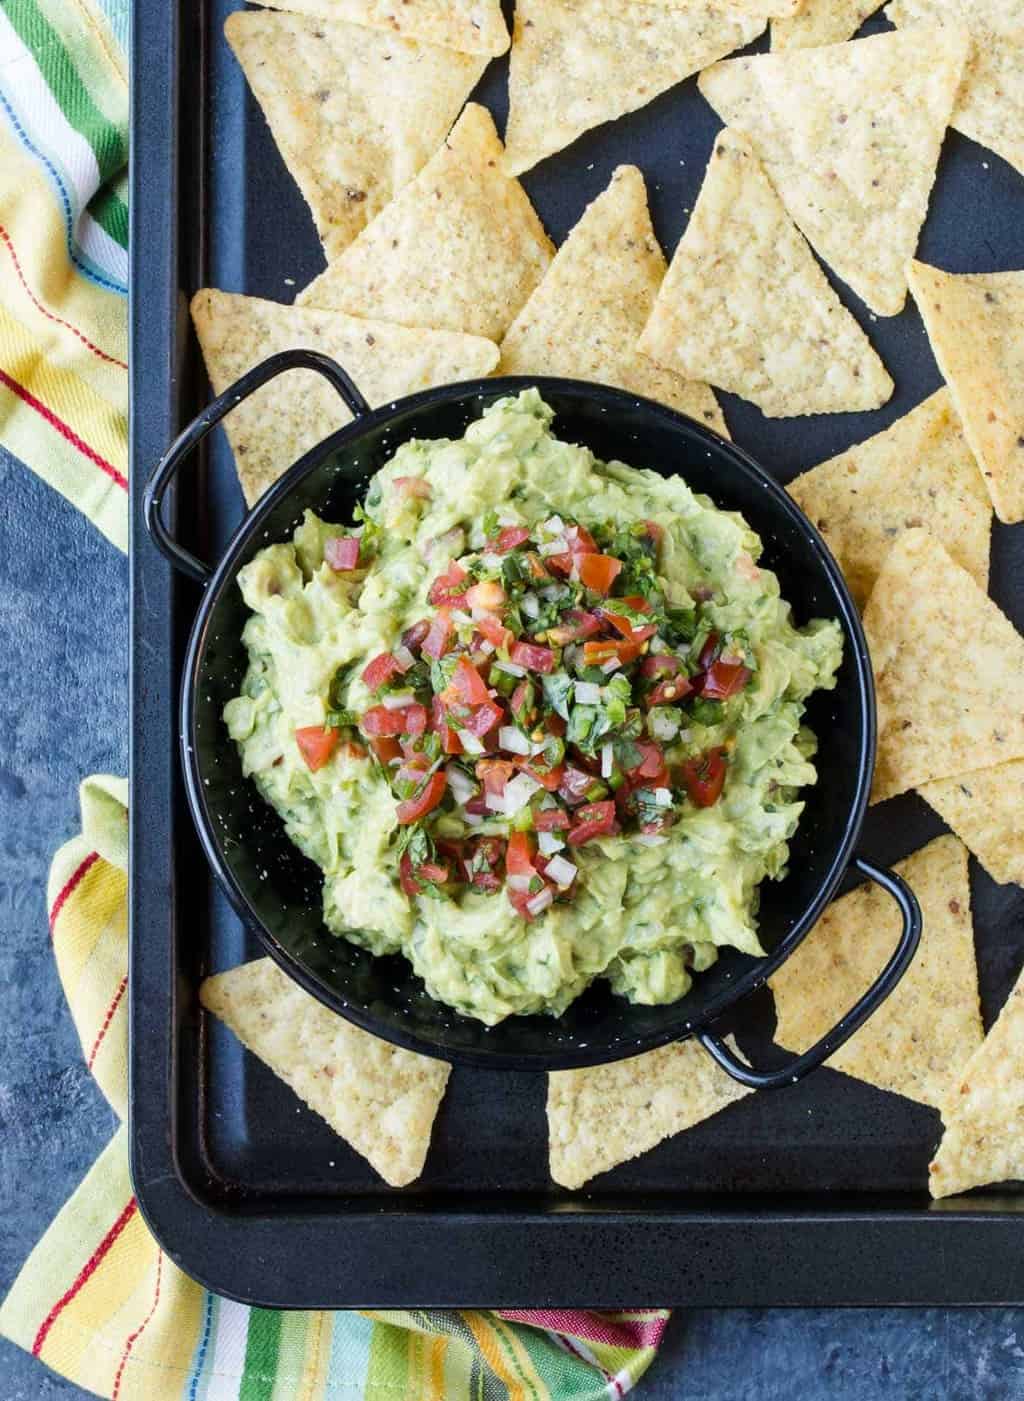 A tray filled with Guacamole, chips and Avocado.